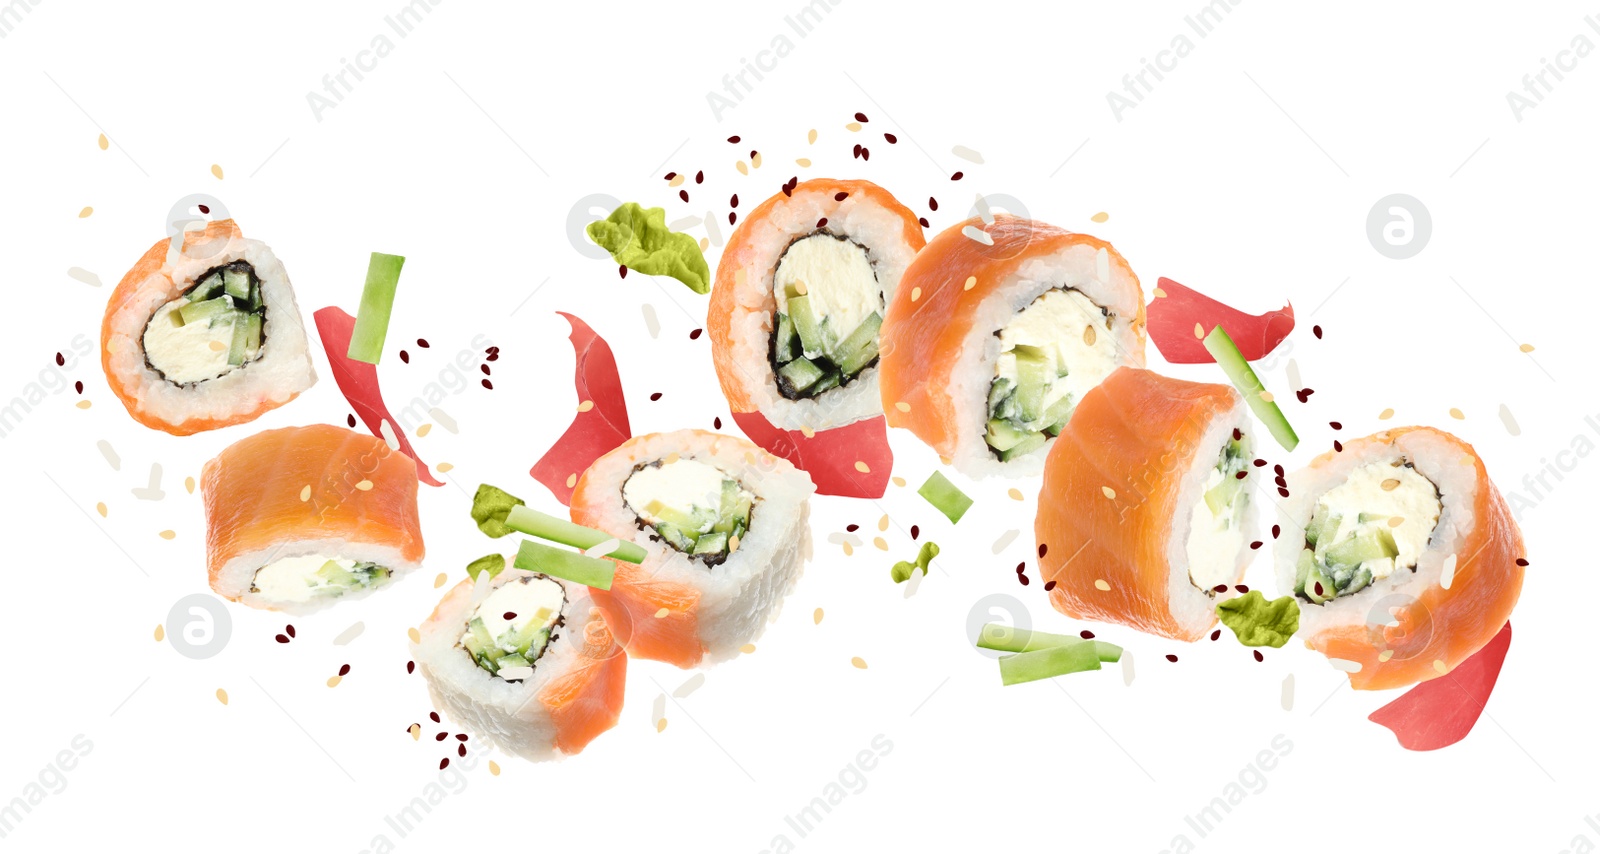 Image of Delicious sushi rolls and ingredients on white background